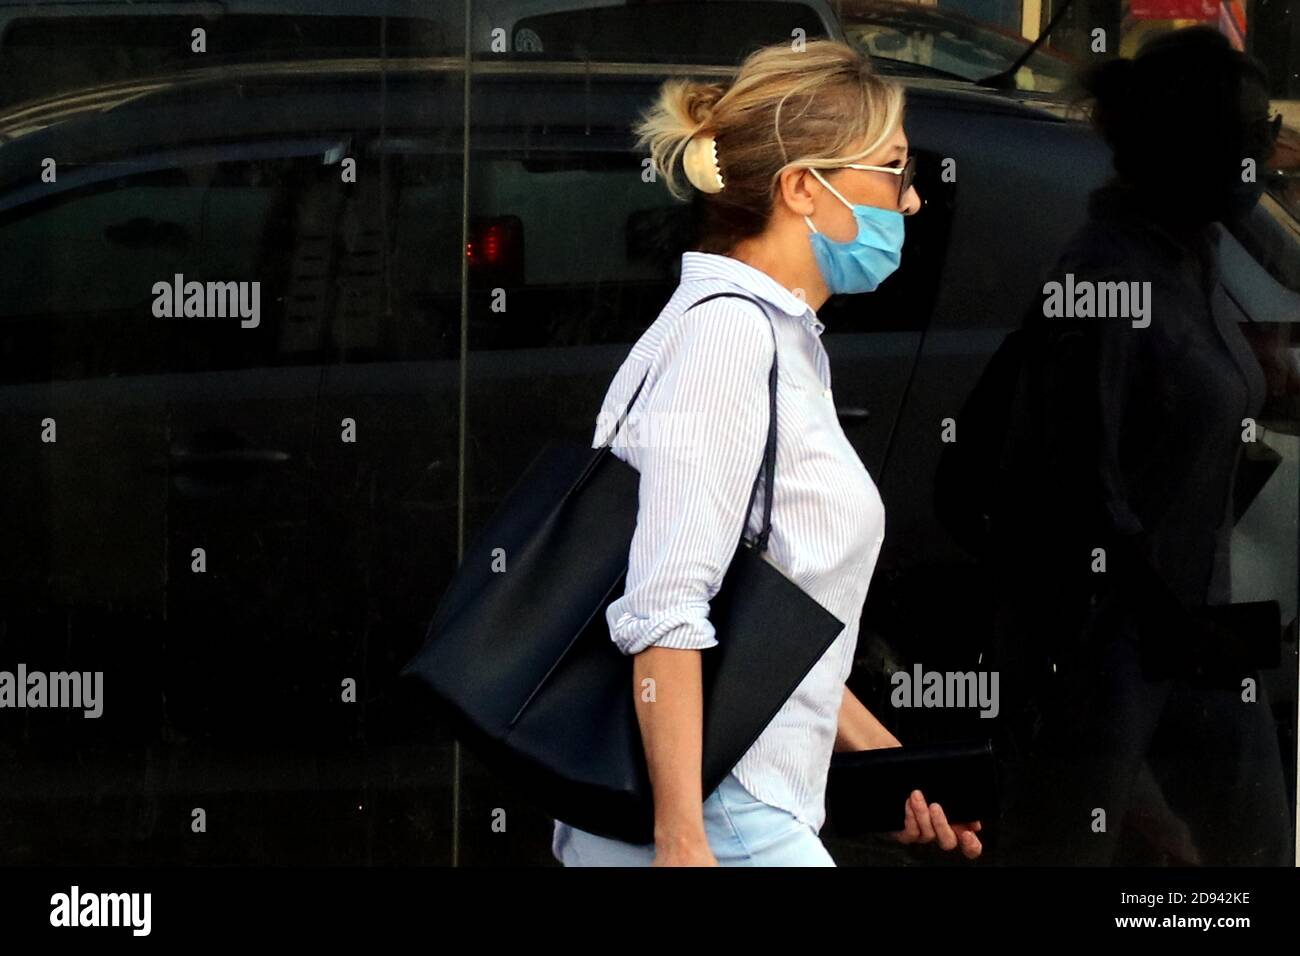 Amman, Jordan. 2nd Nov, 2020. A woman wearing a face mask walks on a street in Amman, capital of Jordan, on Nov. 2, 2020. Jordan on Monday recorded 5,877 new coronavirus cases, the highest daily spike in the country so far, raising the tally to 81,743. Credit: Mohammad Abu Ghosh/Xinhua/Alamy Live News Stock Photo